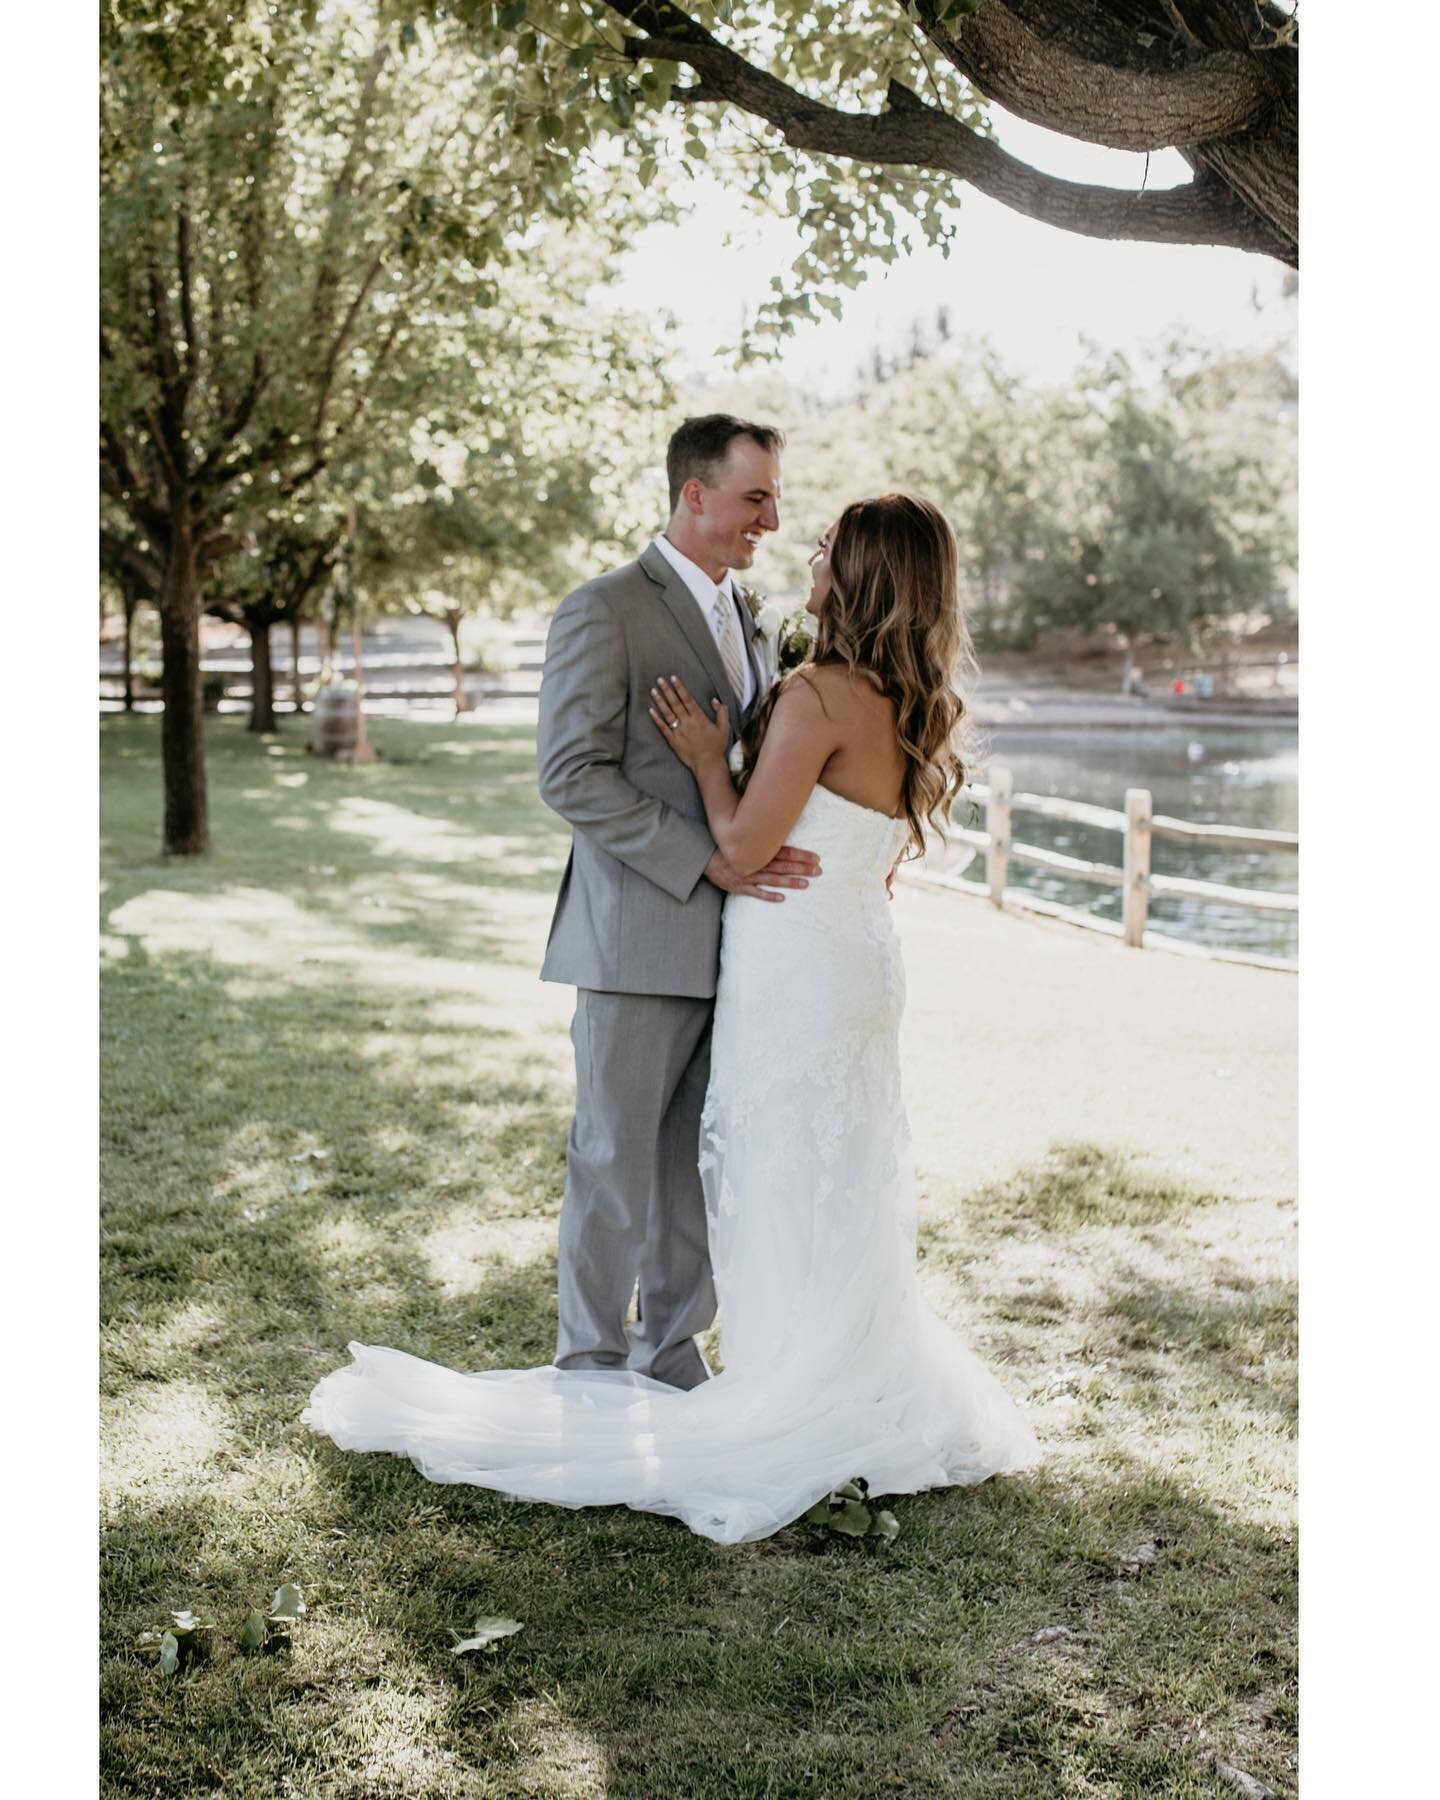 Dreaming of the perfect wedding venue? Our ✨Vendor Spotlight ✨ of the day knows how to make your wedding day dreams come true.

Hurst Ranch in Jamestown, California is a family-owned ranch that understands just how important your wedding day is. Whet